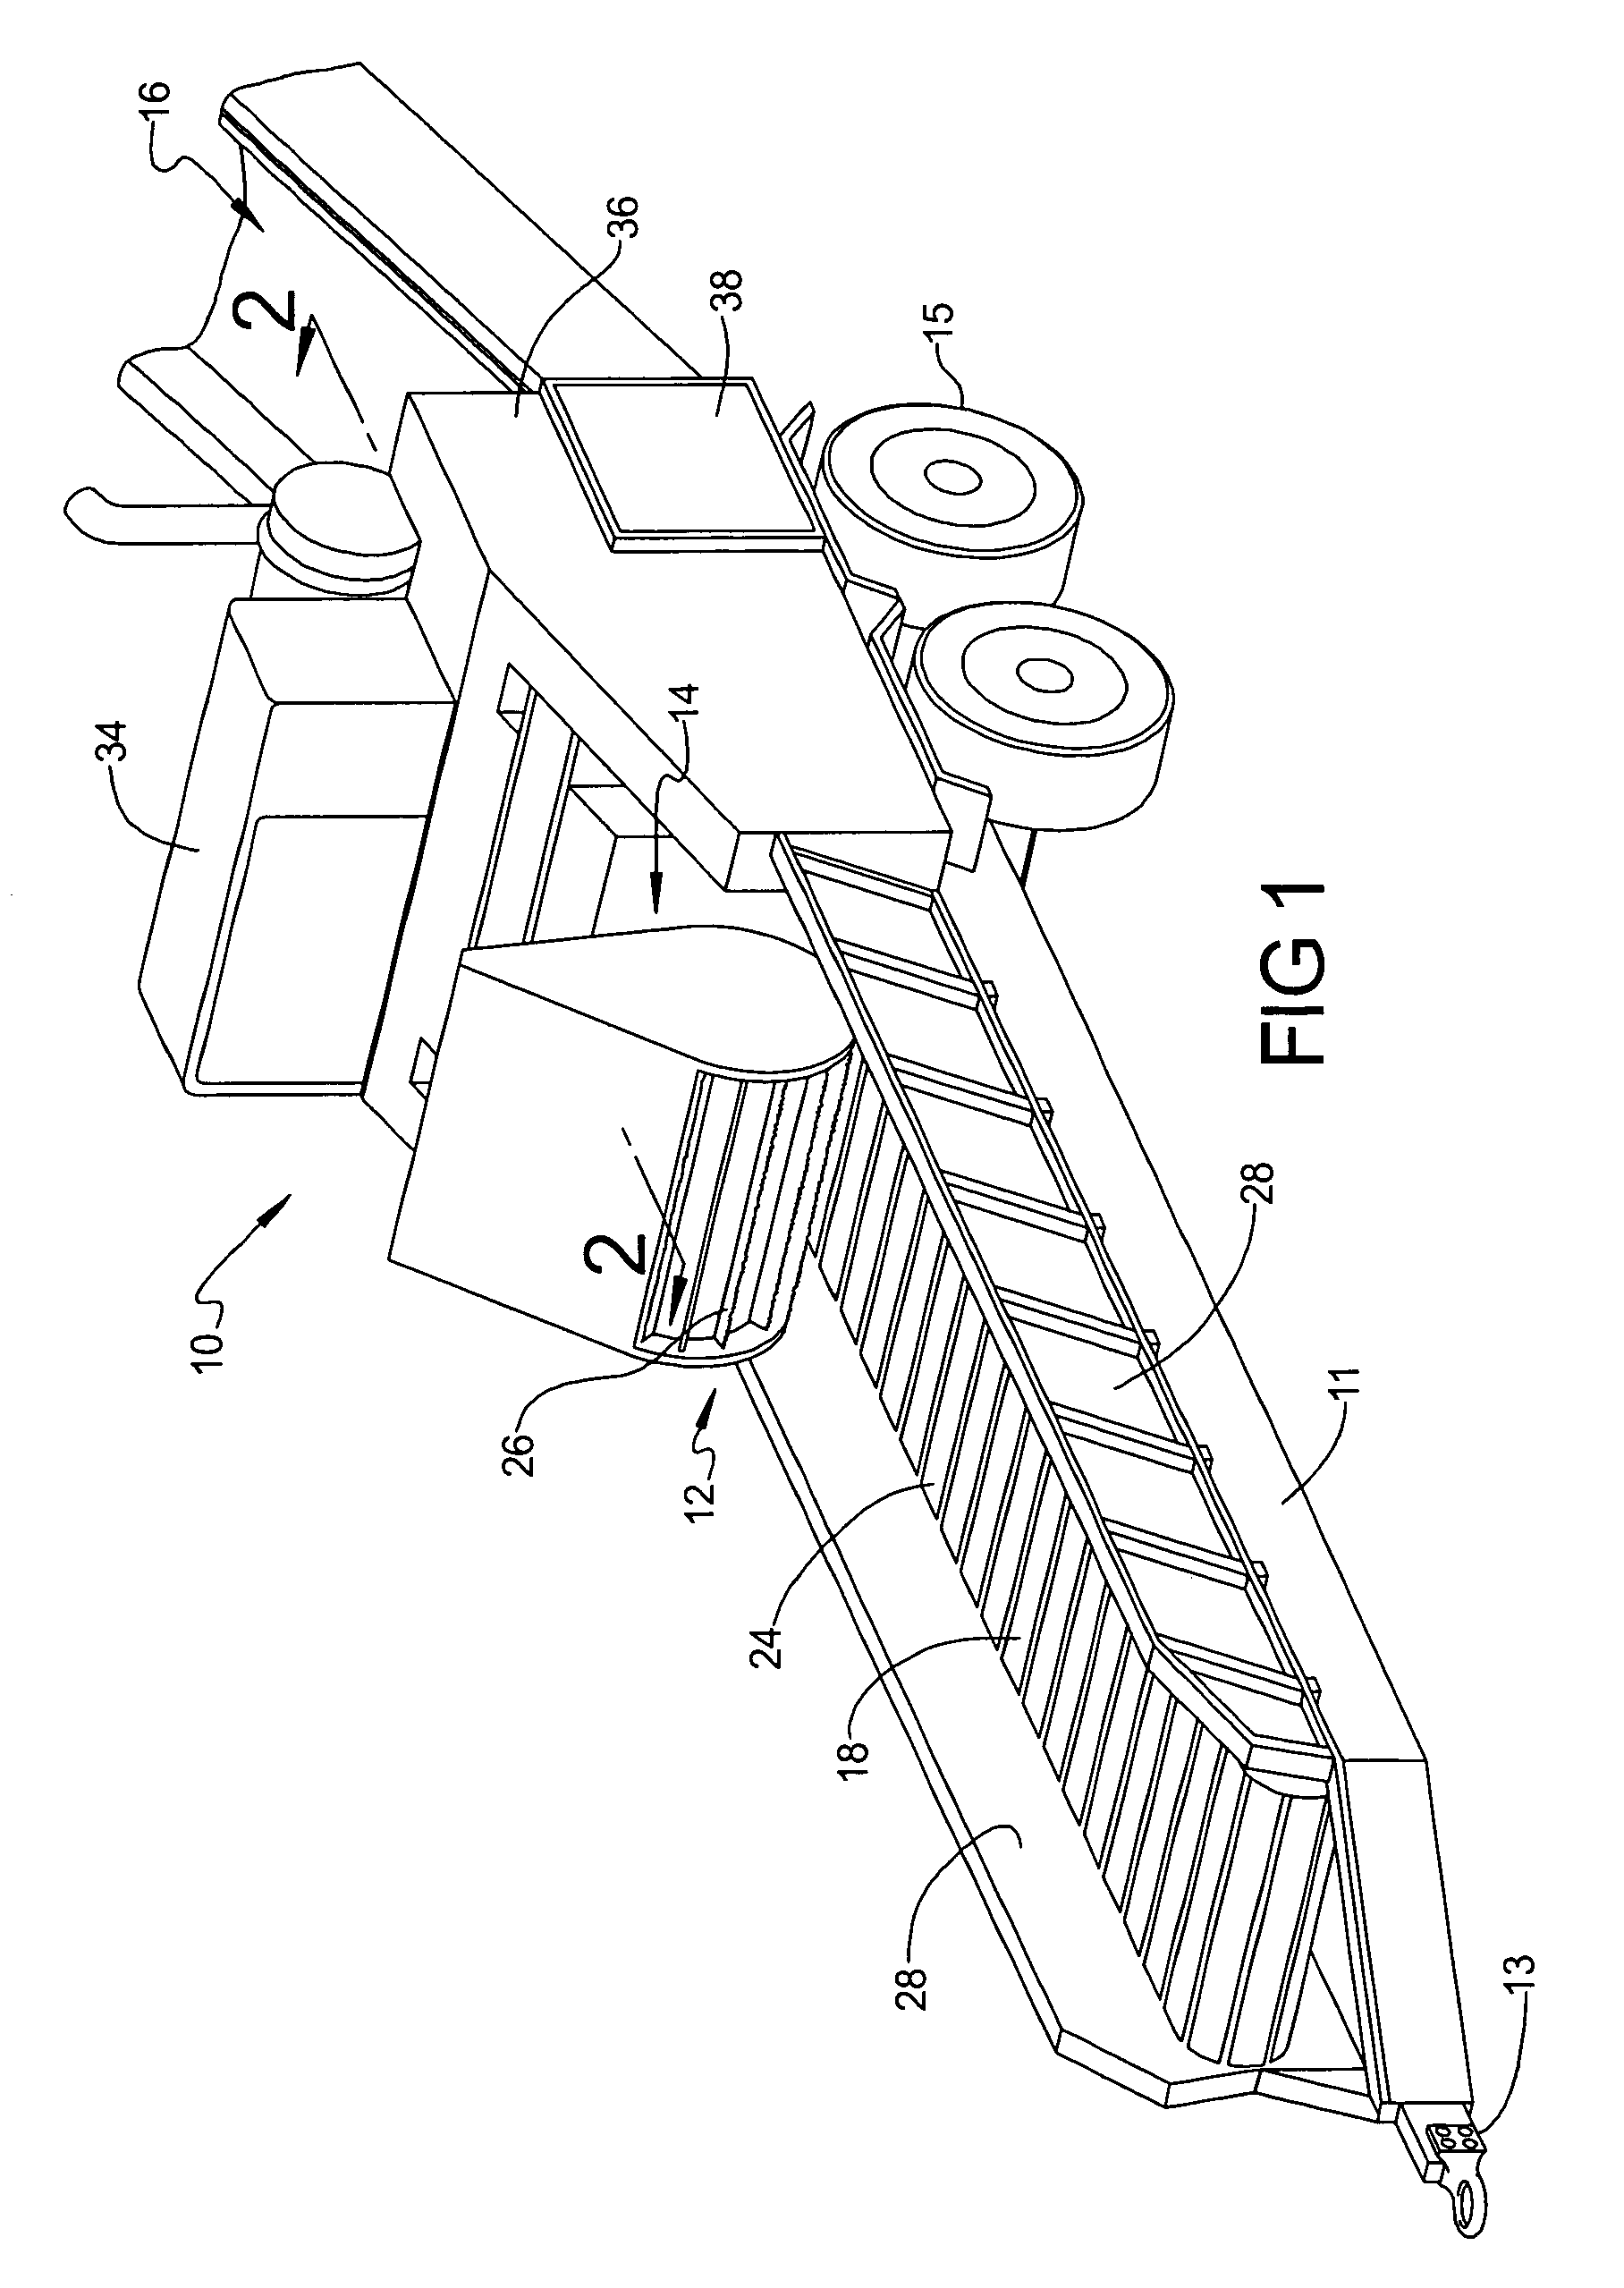 Rotatable assembly for machines